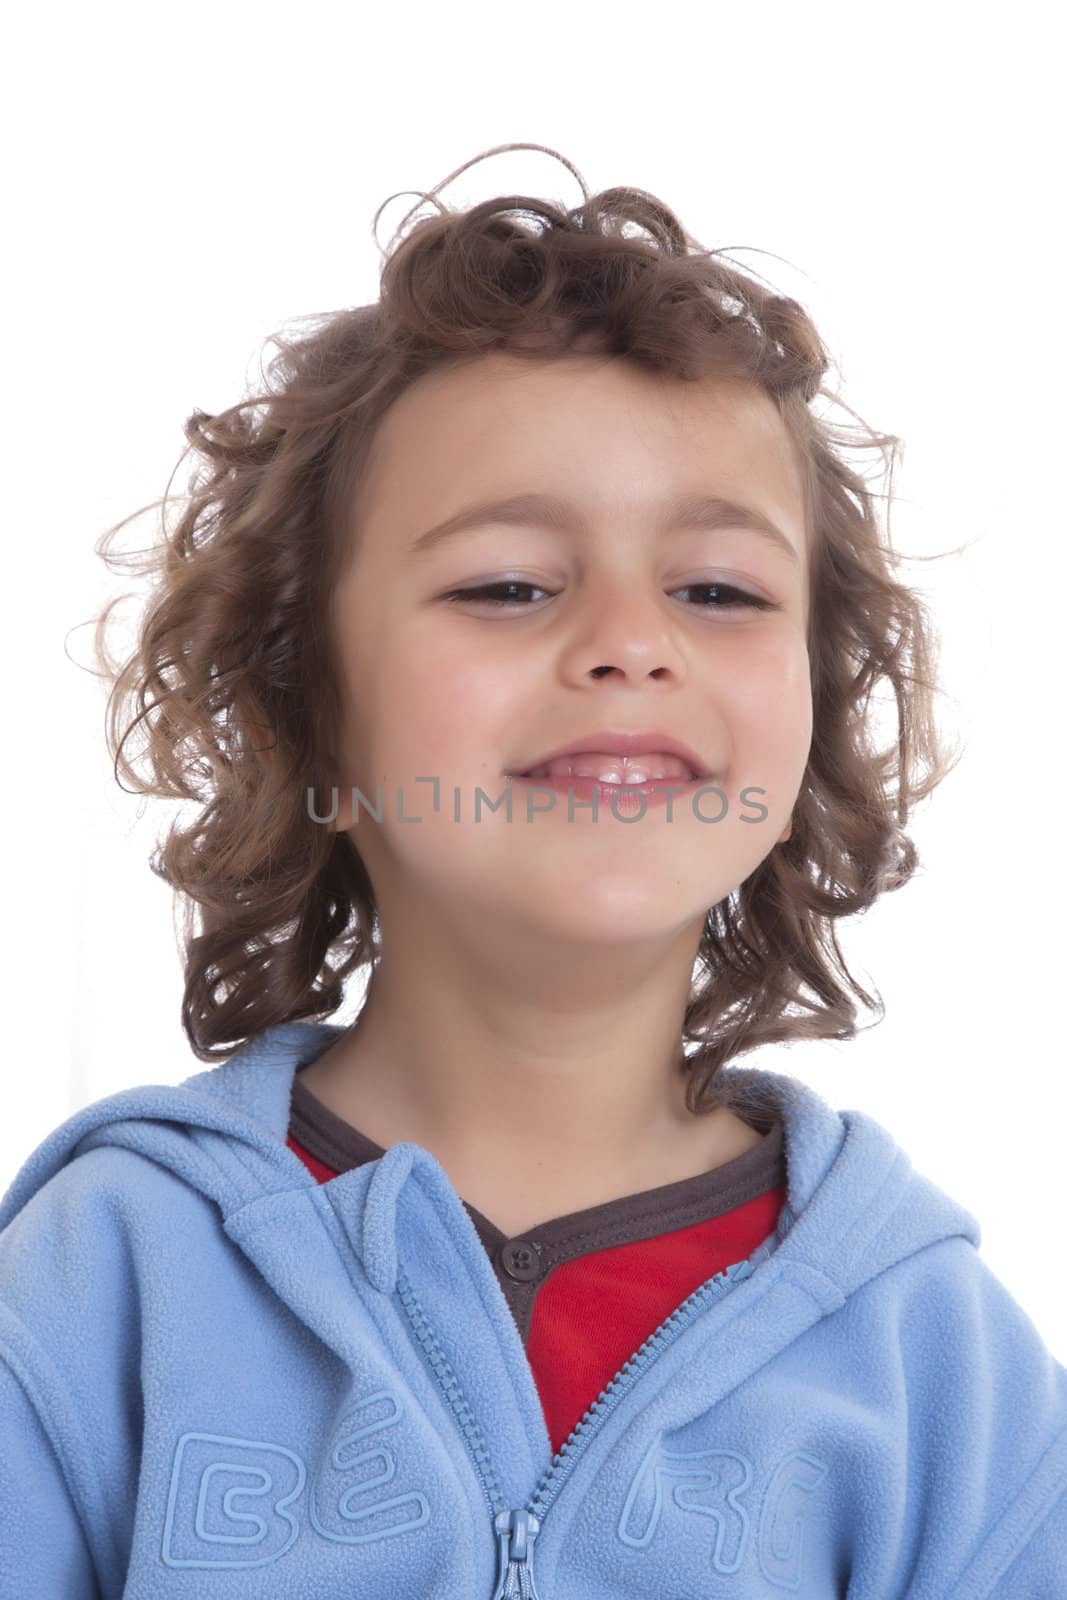 young kid over white background